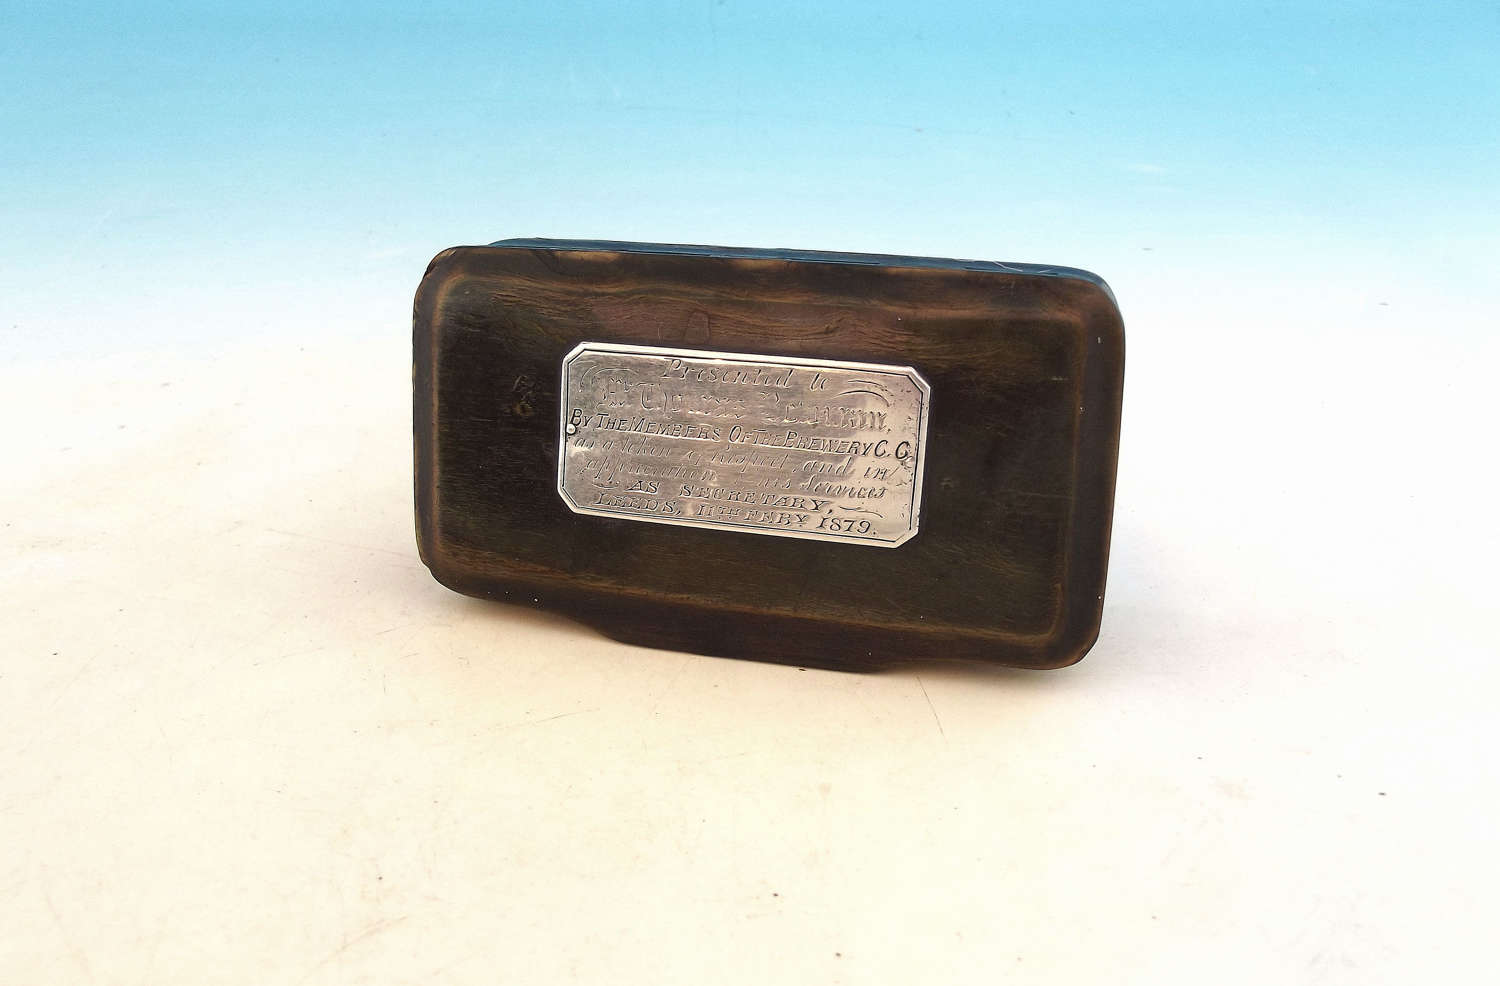 Antique Collectables 19thc Horn Snuff Box - Brewery C.C Dated 1879